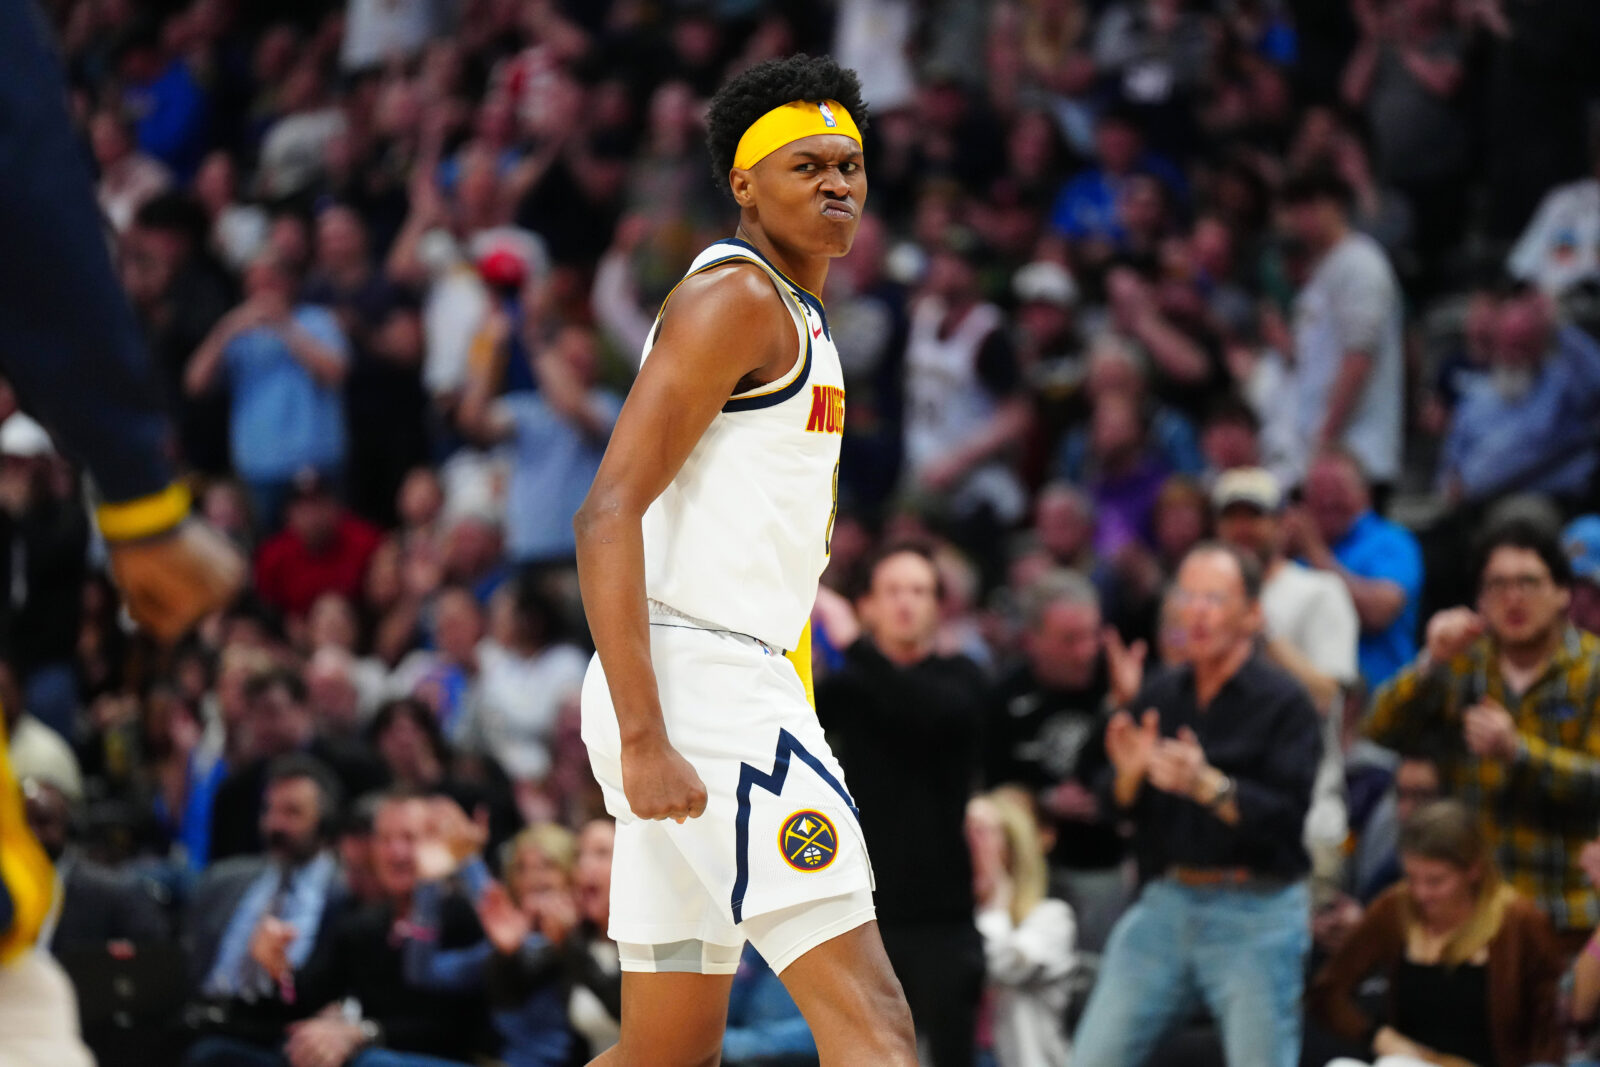 Grand Rapids Gold receive boost from Denver Nuggets NBA